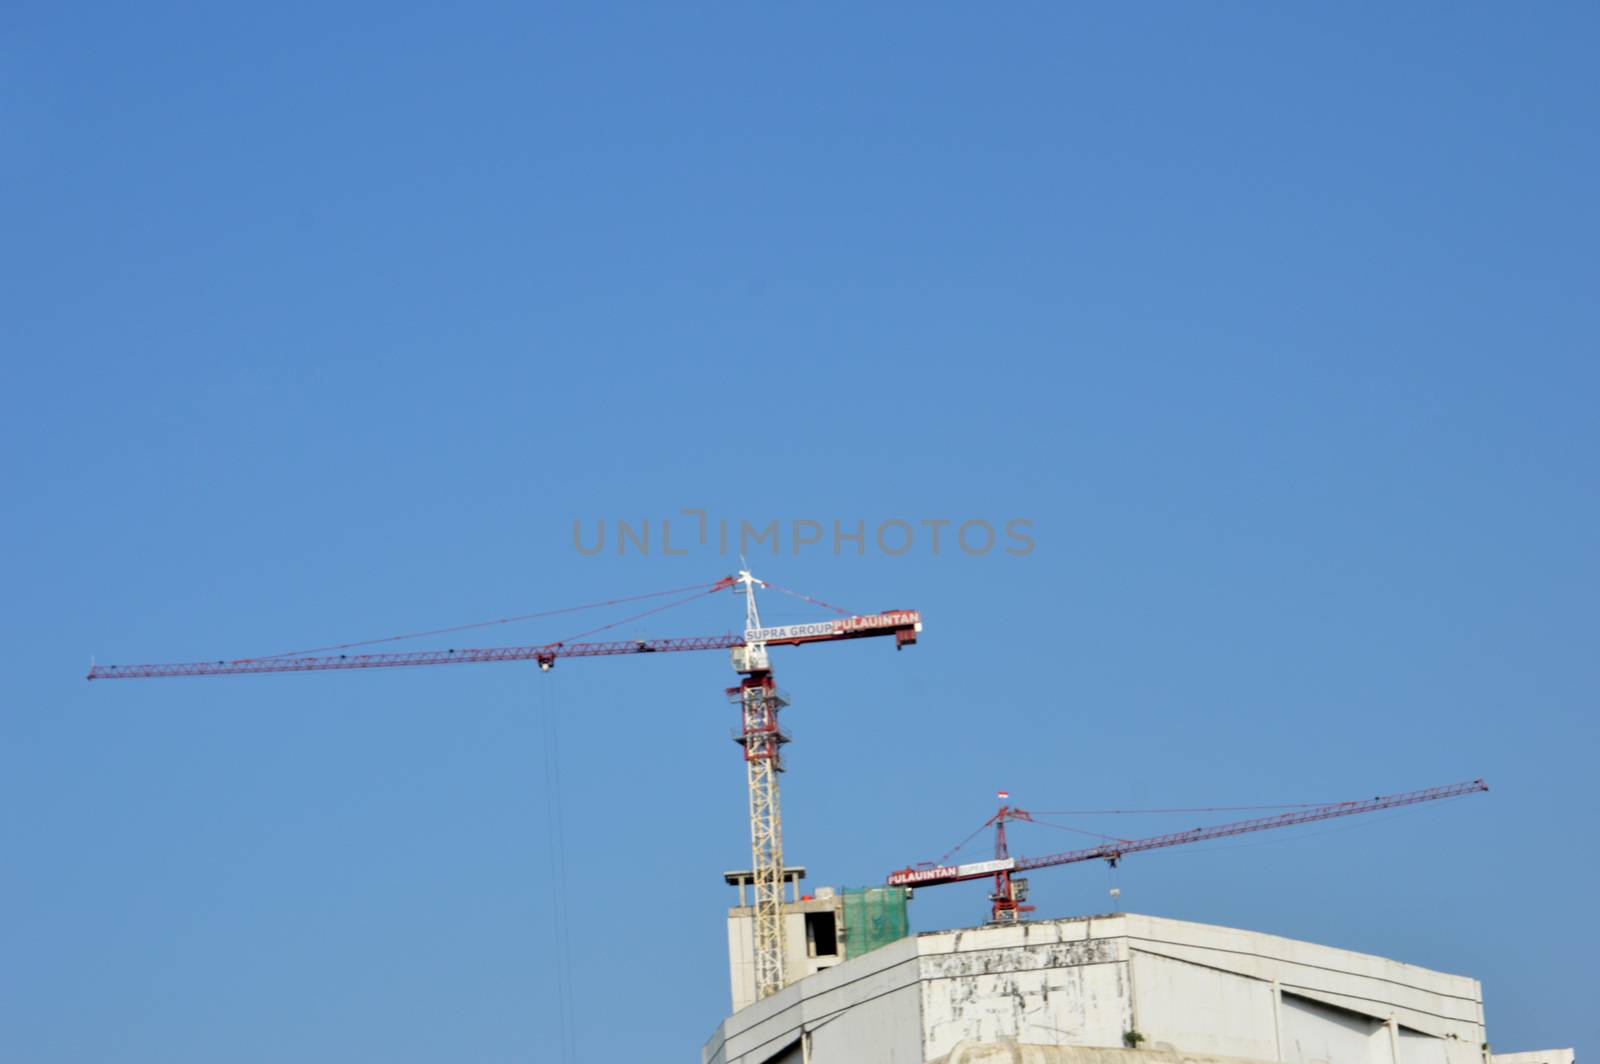 crane on a building in construction by antonihalim